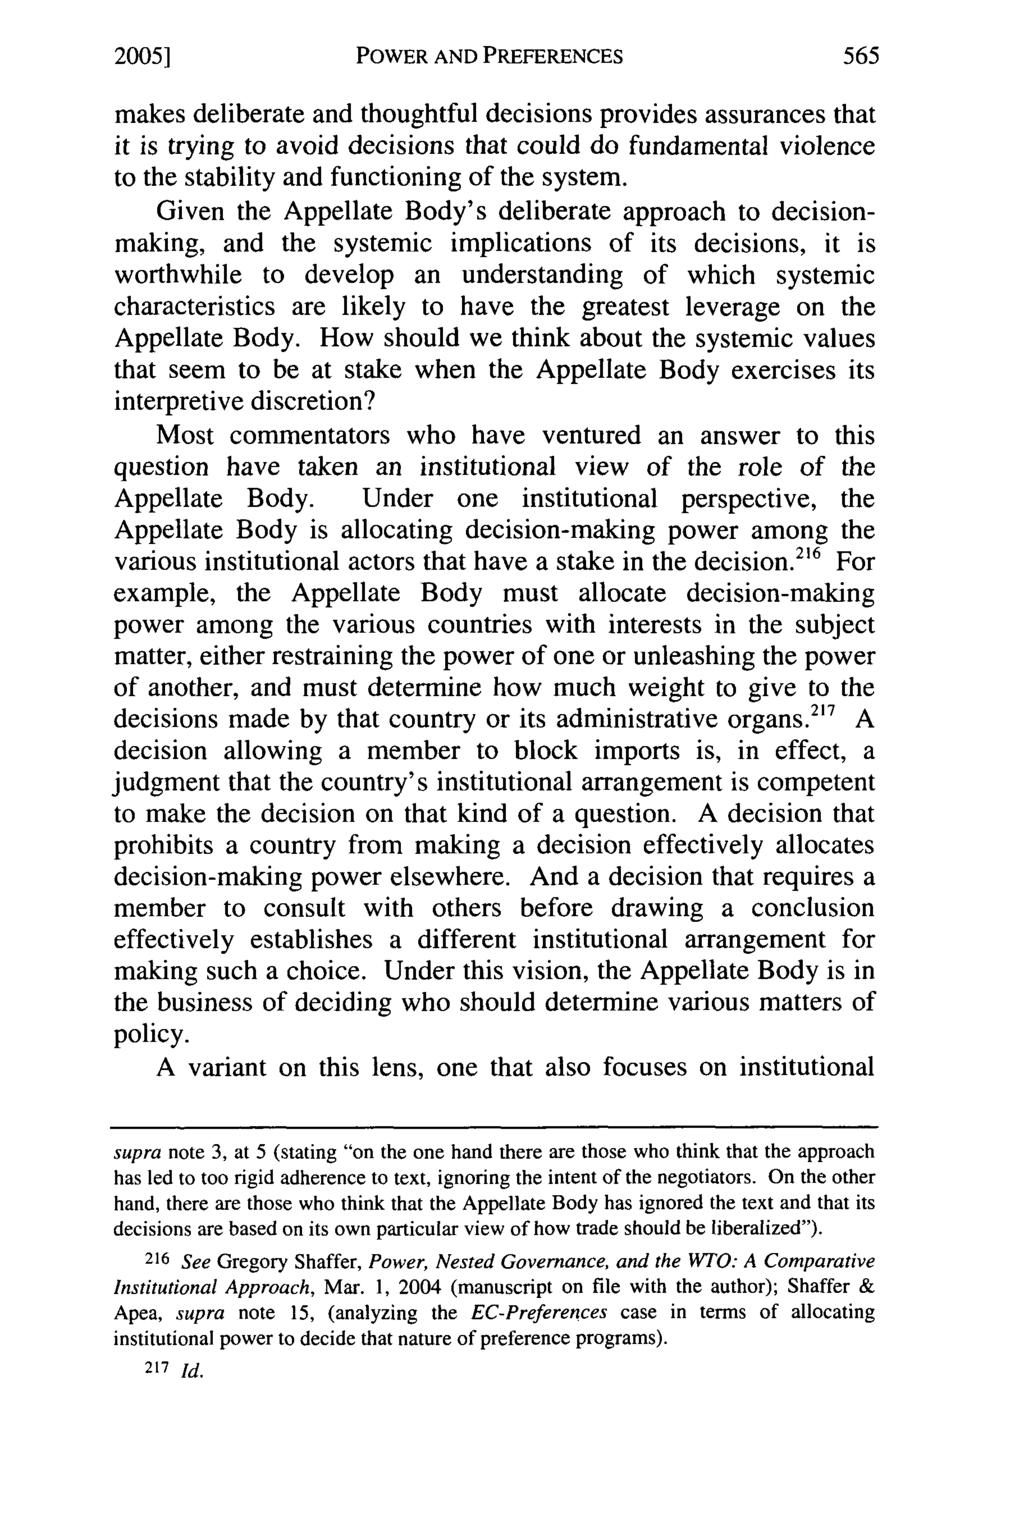 2005] POWER AND PREFERENCES makes deliberate and thoughtful decisions provides assurances that it is trying to avoid decisions that could do fundamental violence to the stability and functioning of